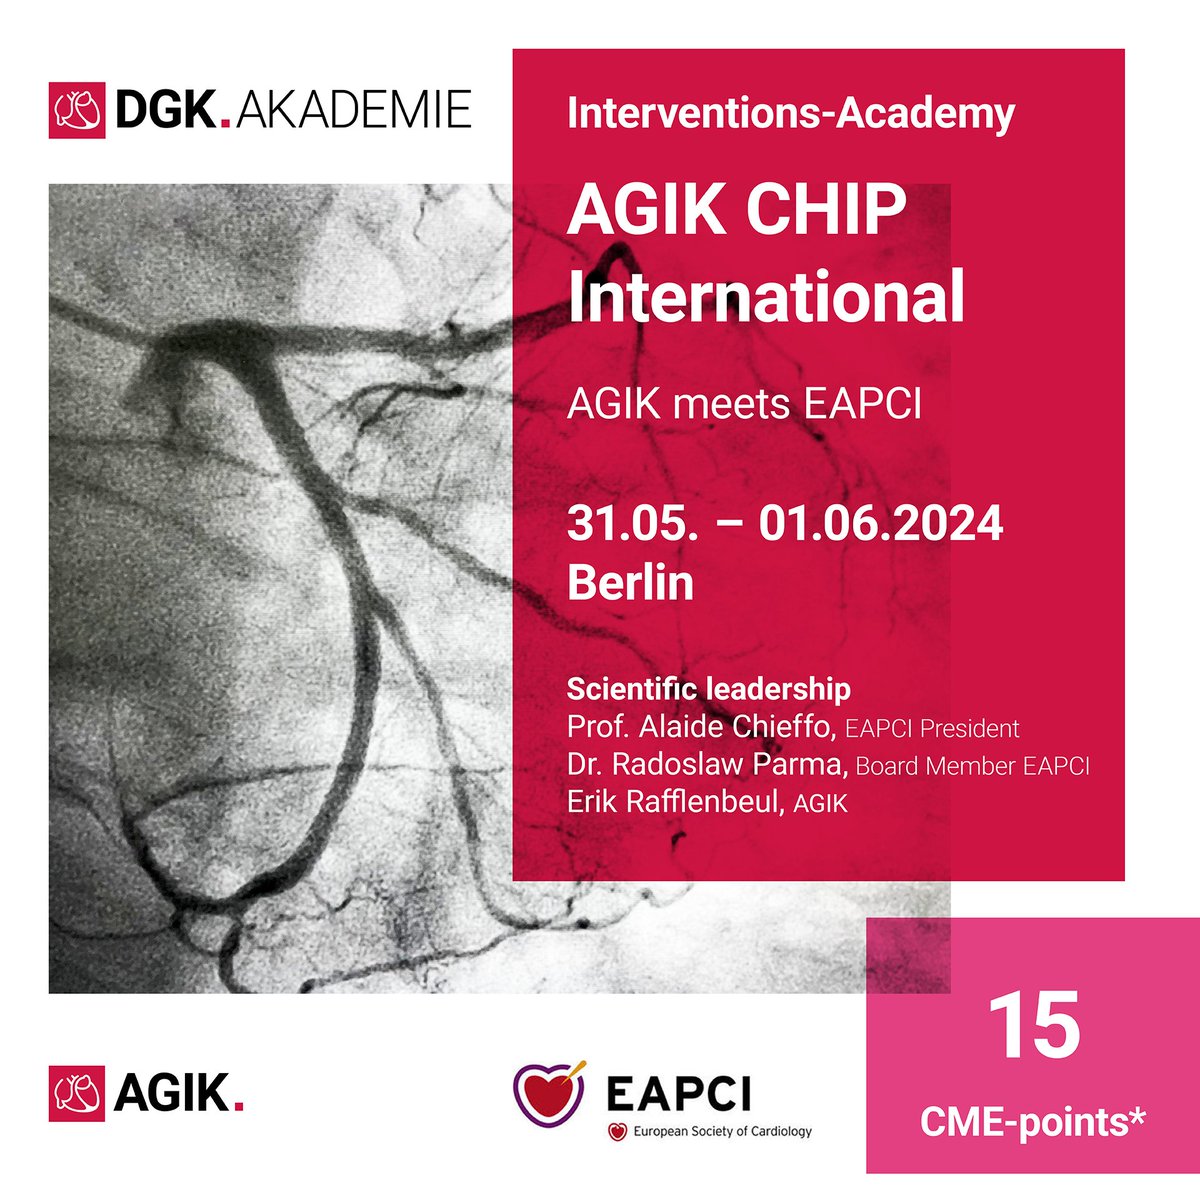 🚨#NextLevelEducation by #AGIK + #EAPCI 🚨 Save YOUR place for this exclusive course: #AGIKCHIPInternational 🗓️31 May + 1 June 2024 📌Berlin 👩‍⚕️👨🏼‍⚕️HighClassFaculty ‼️Register here (only few free slots available)‼️ 🔗akademie.dgk.org/register #Innovation made by #AGIK